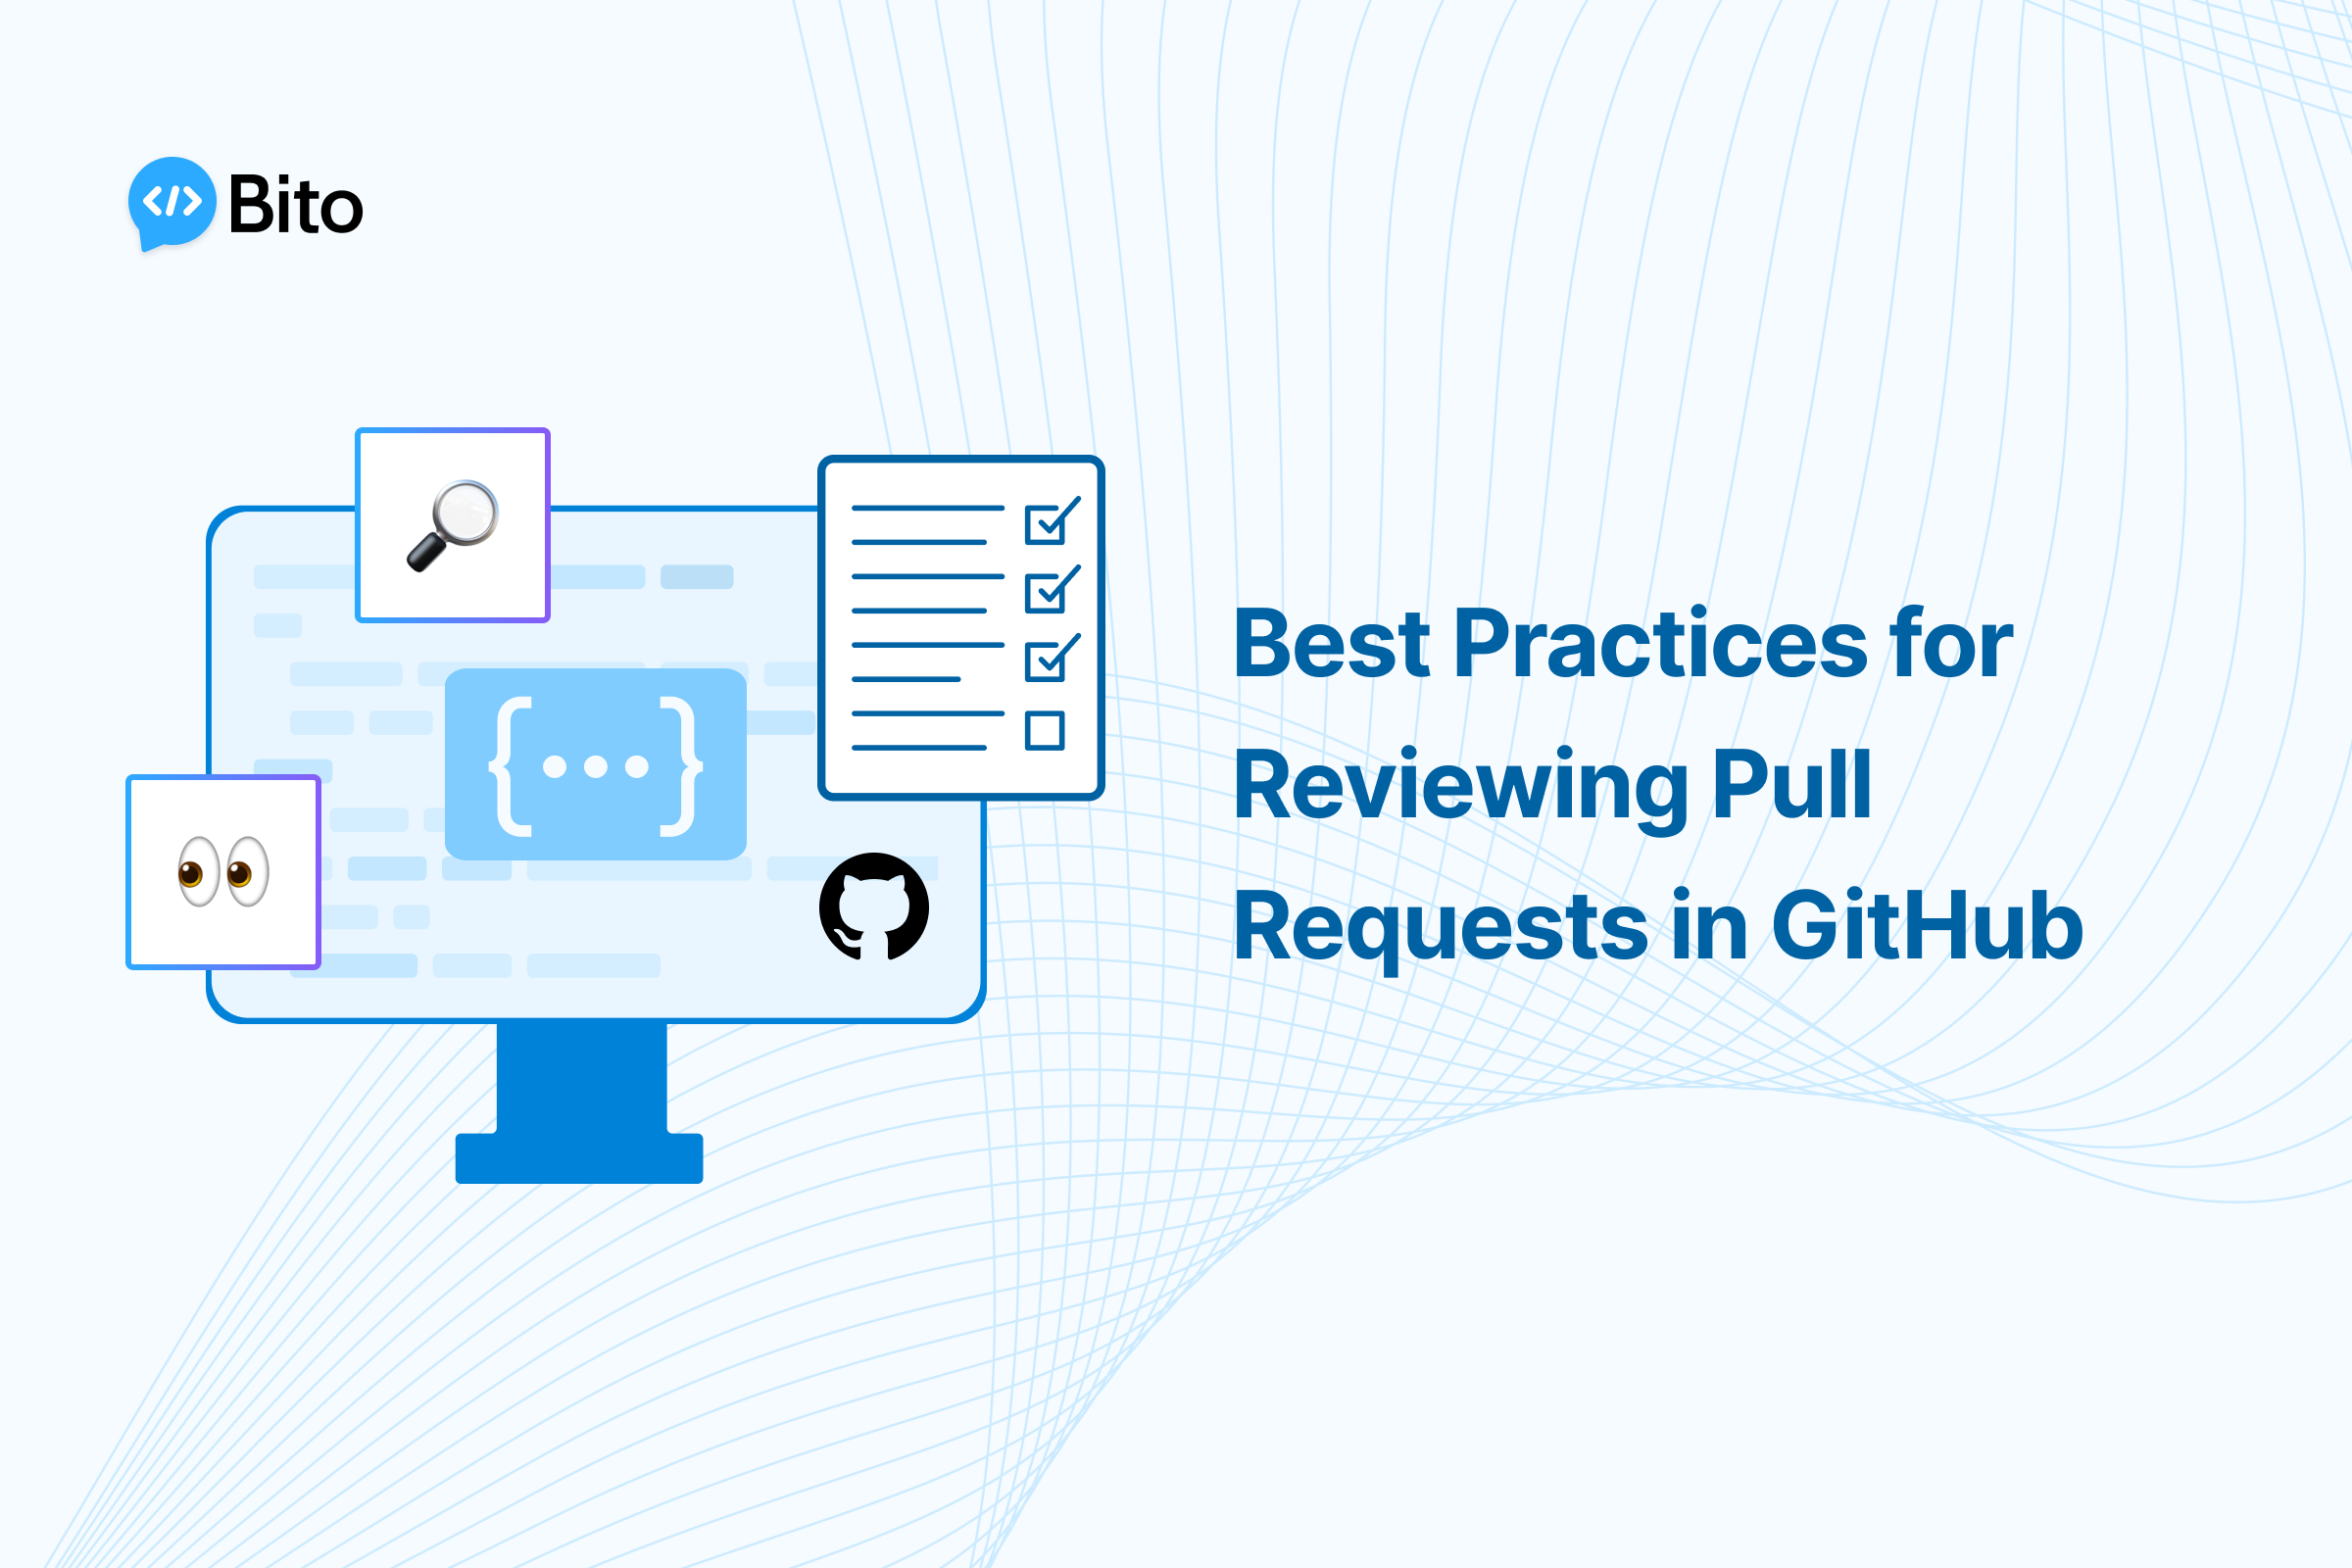 Best Practices for Reviewing Pull Requests in GitHub